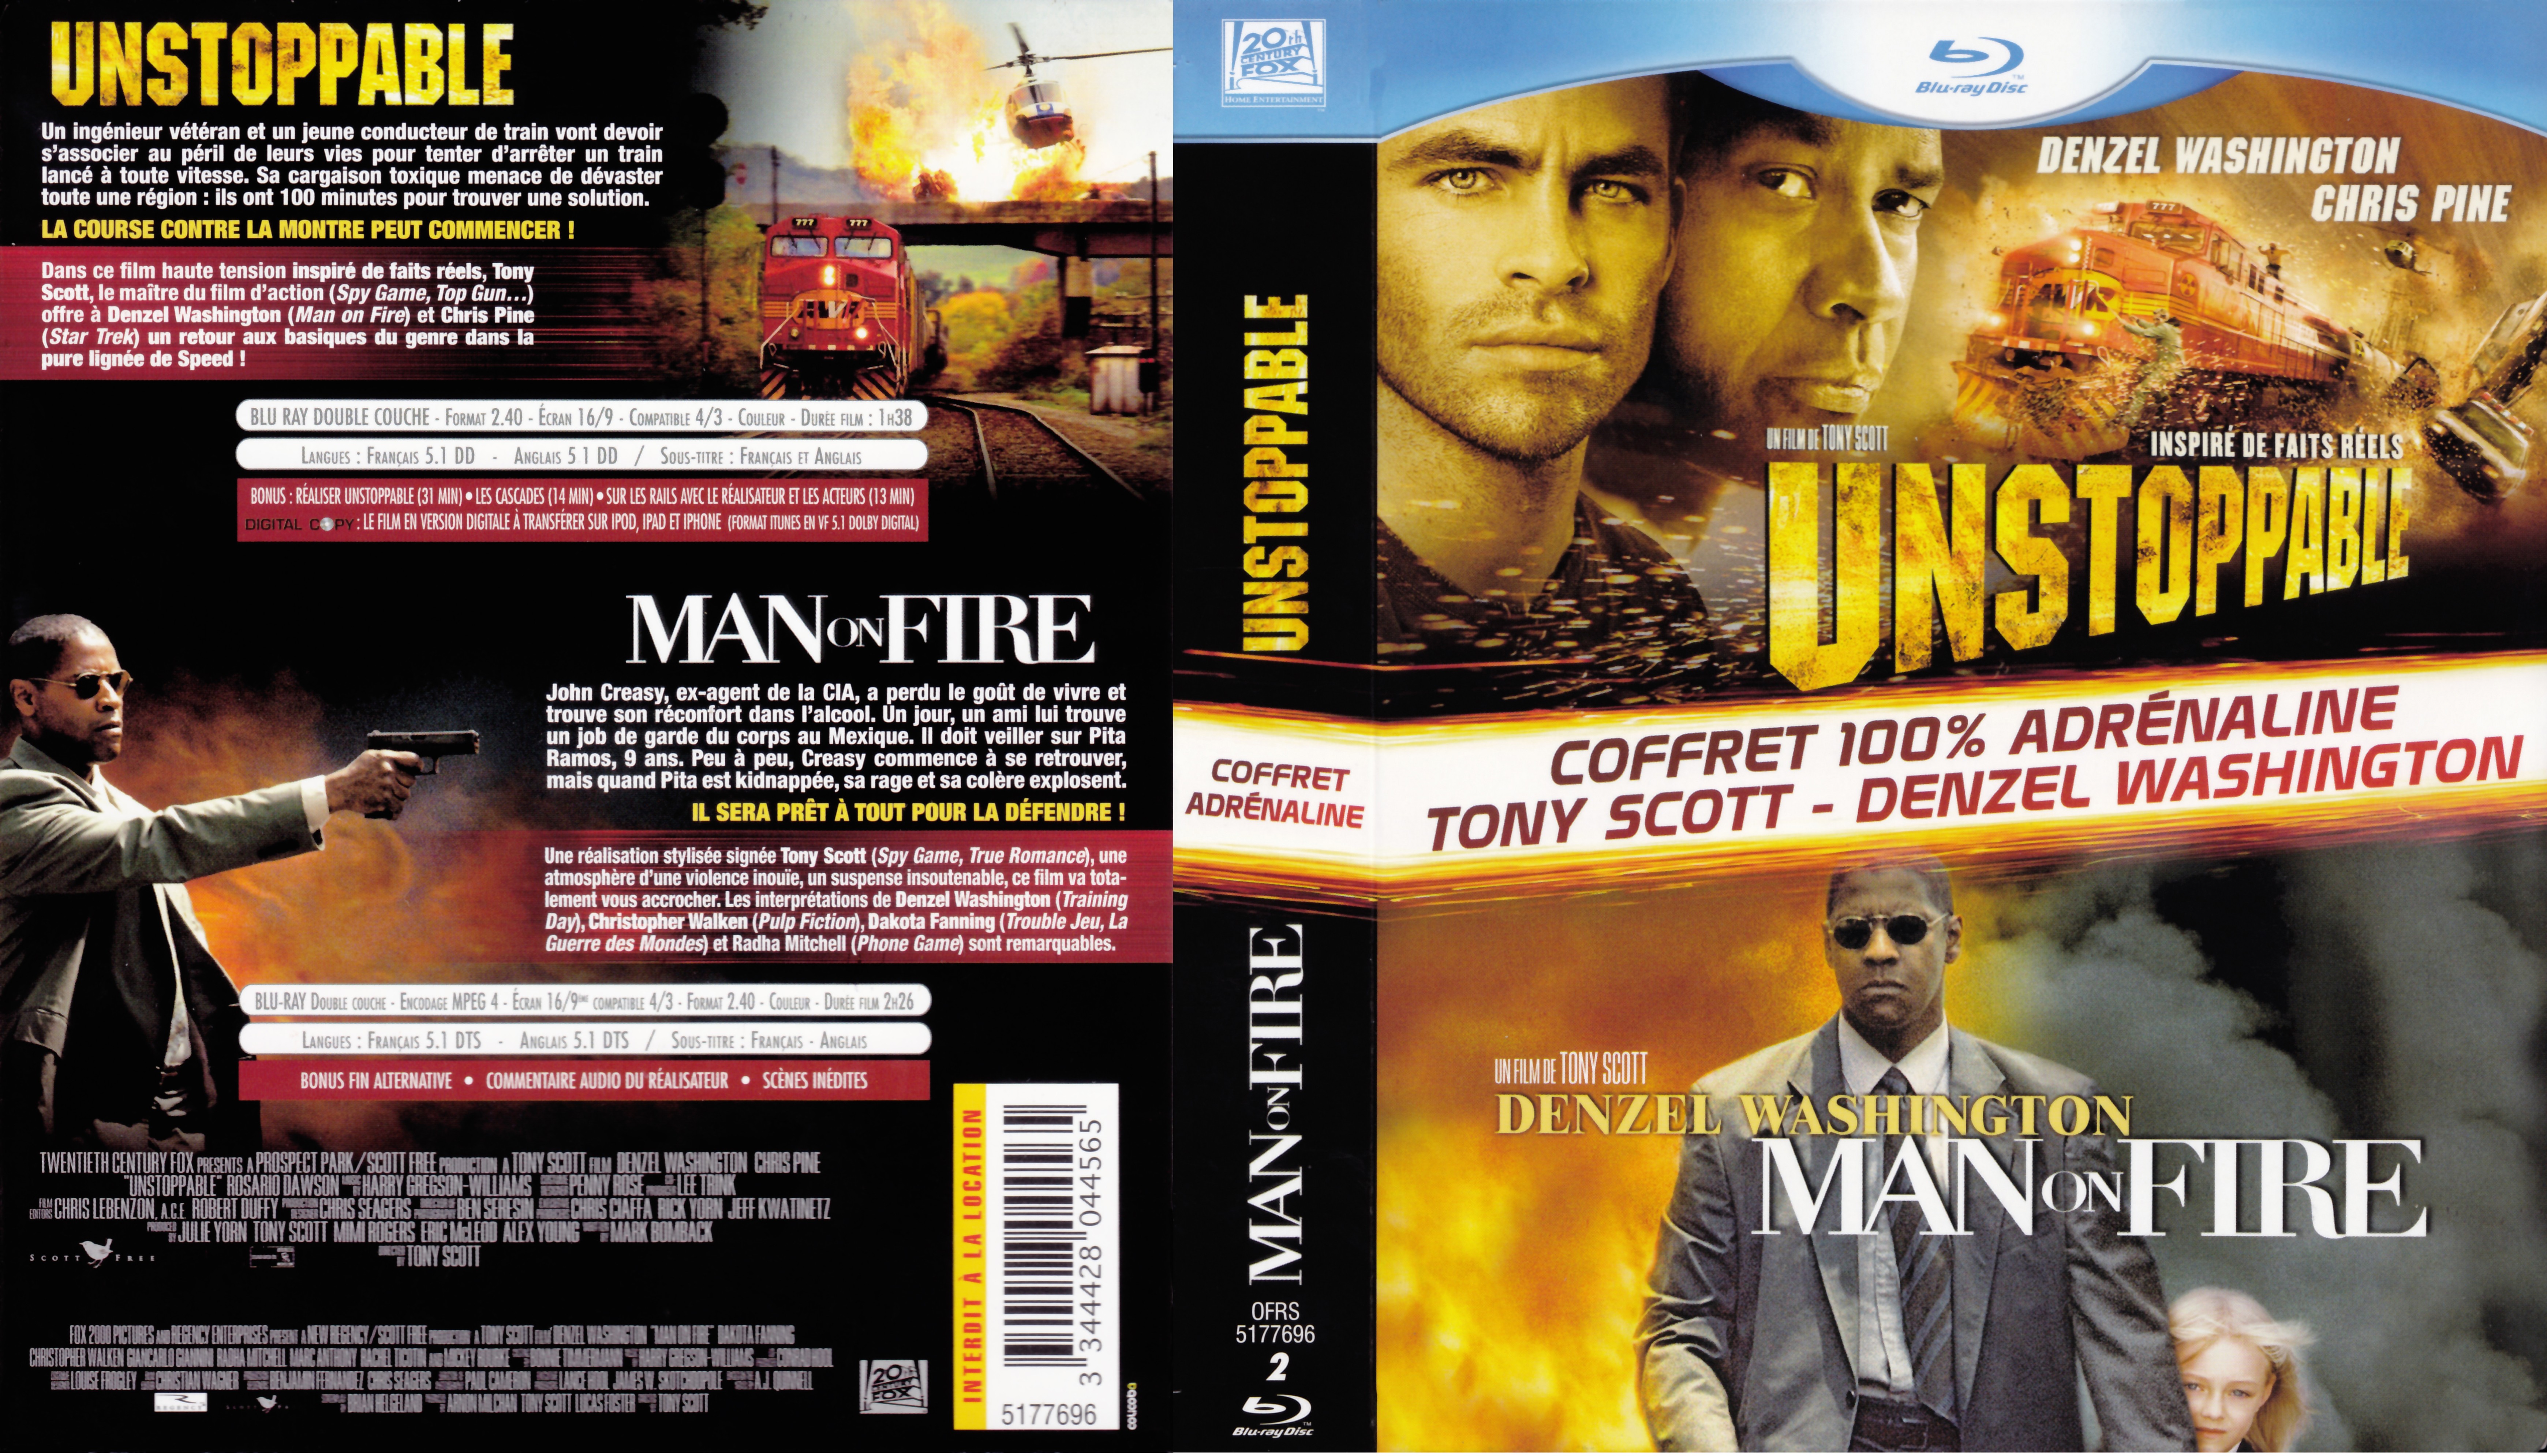 Jaquette DVD Unstoppable & Man on fire COFFRET (BLU-RAY)